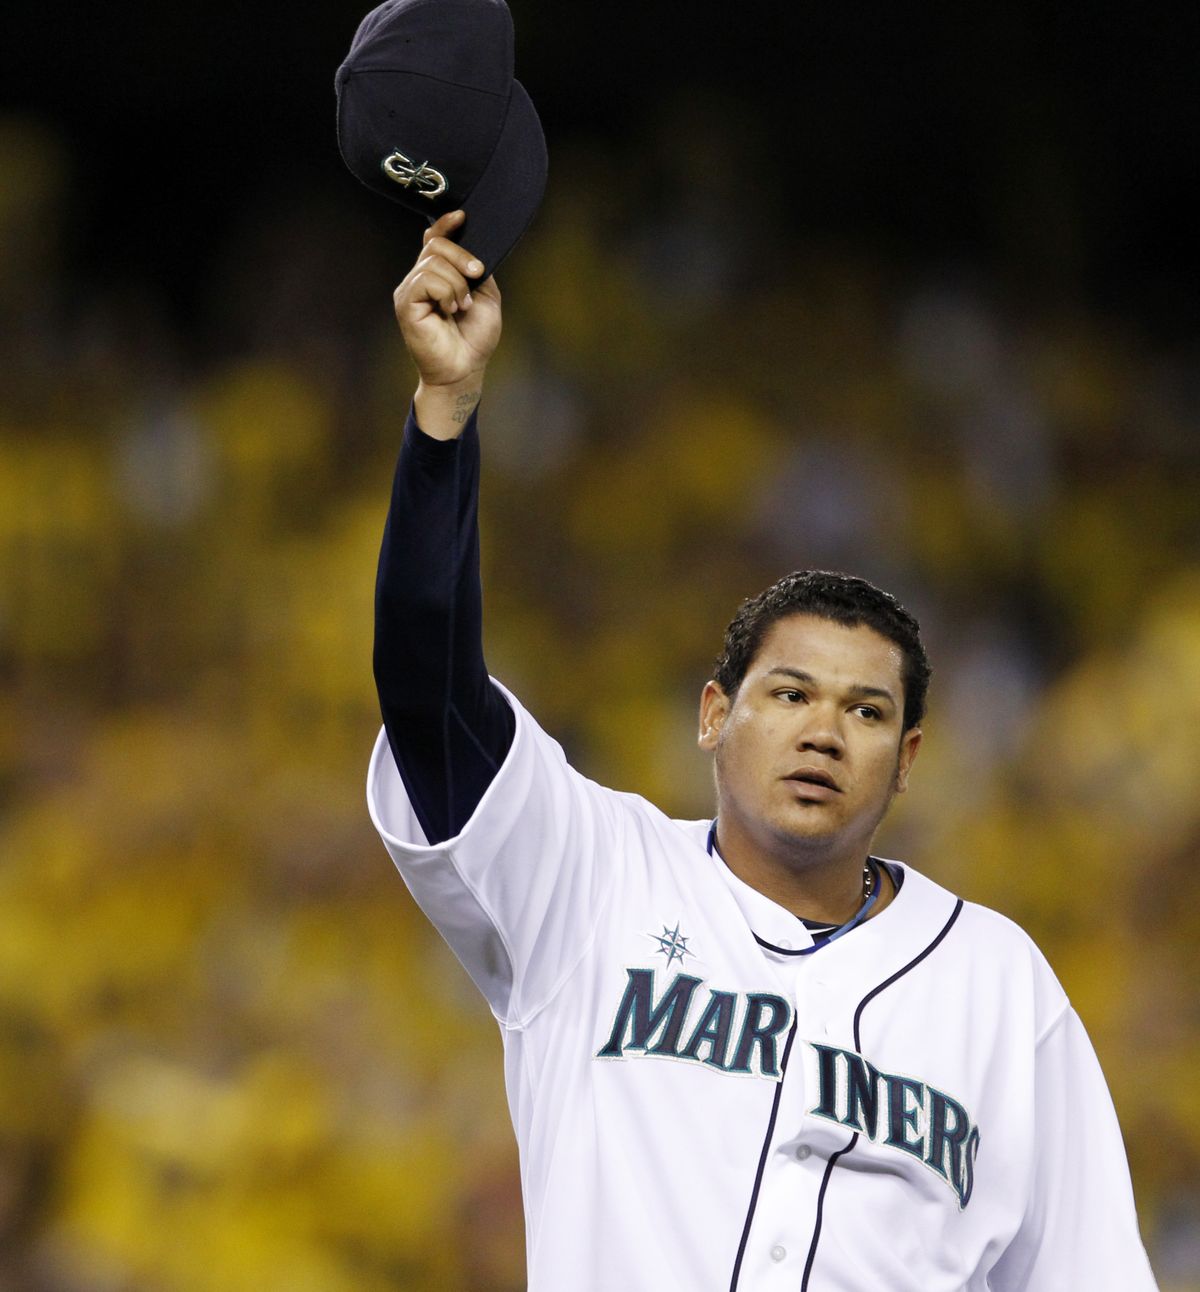 Felix Hernandez waves after being pulled in eighth inning. (Associated Press)